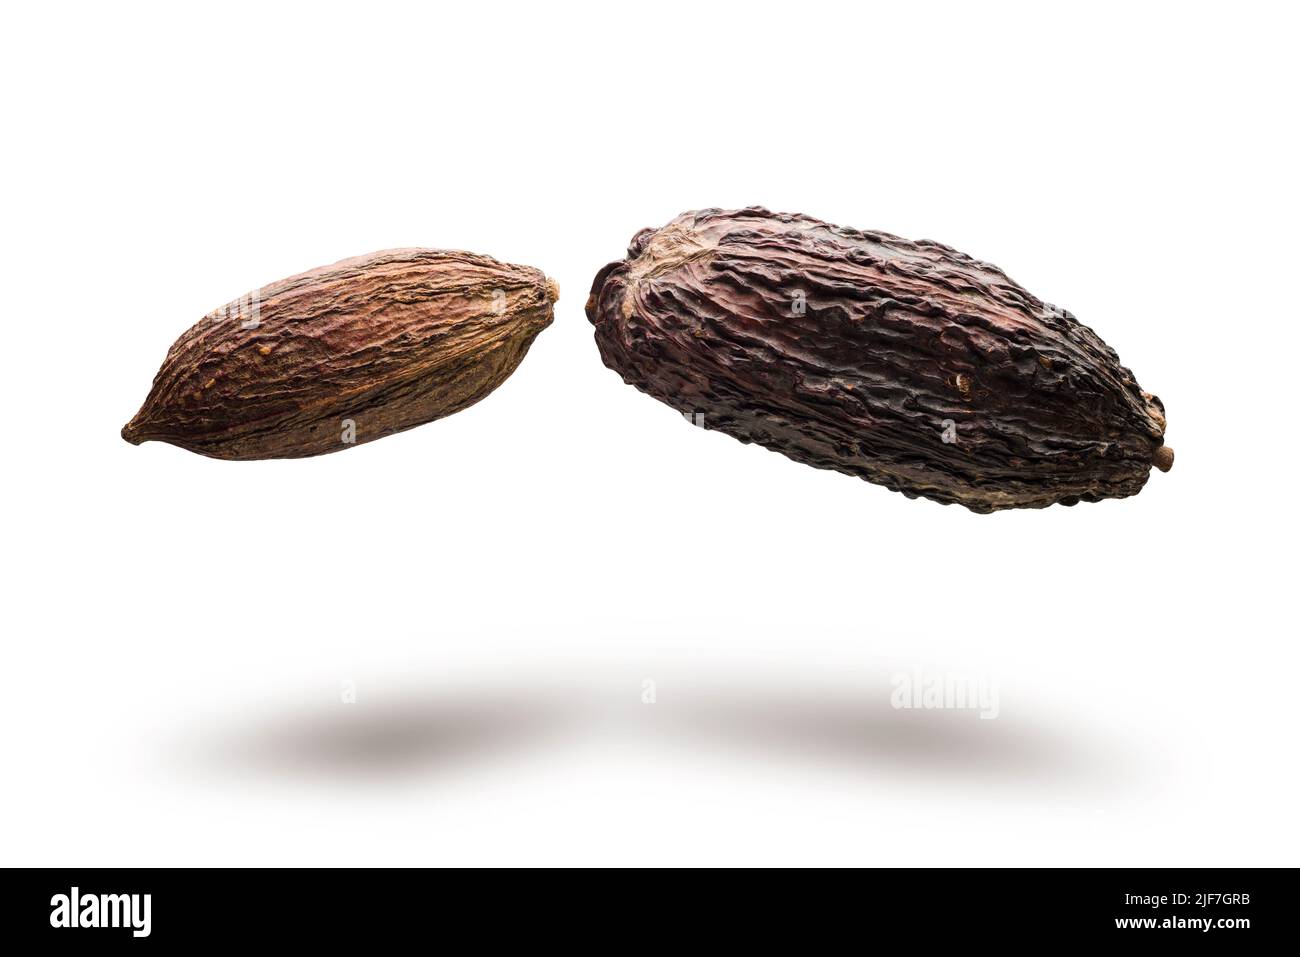 Cocoa pods jumping on white background Stock Photo